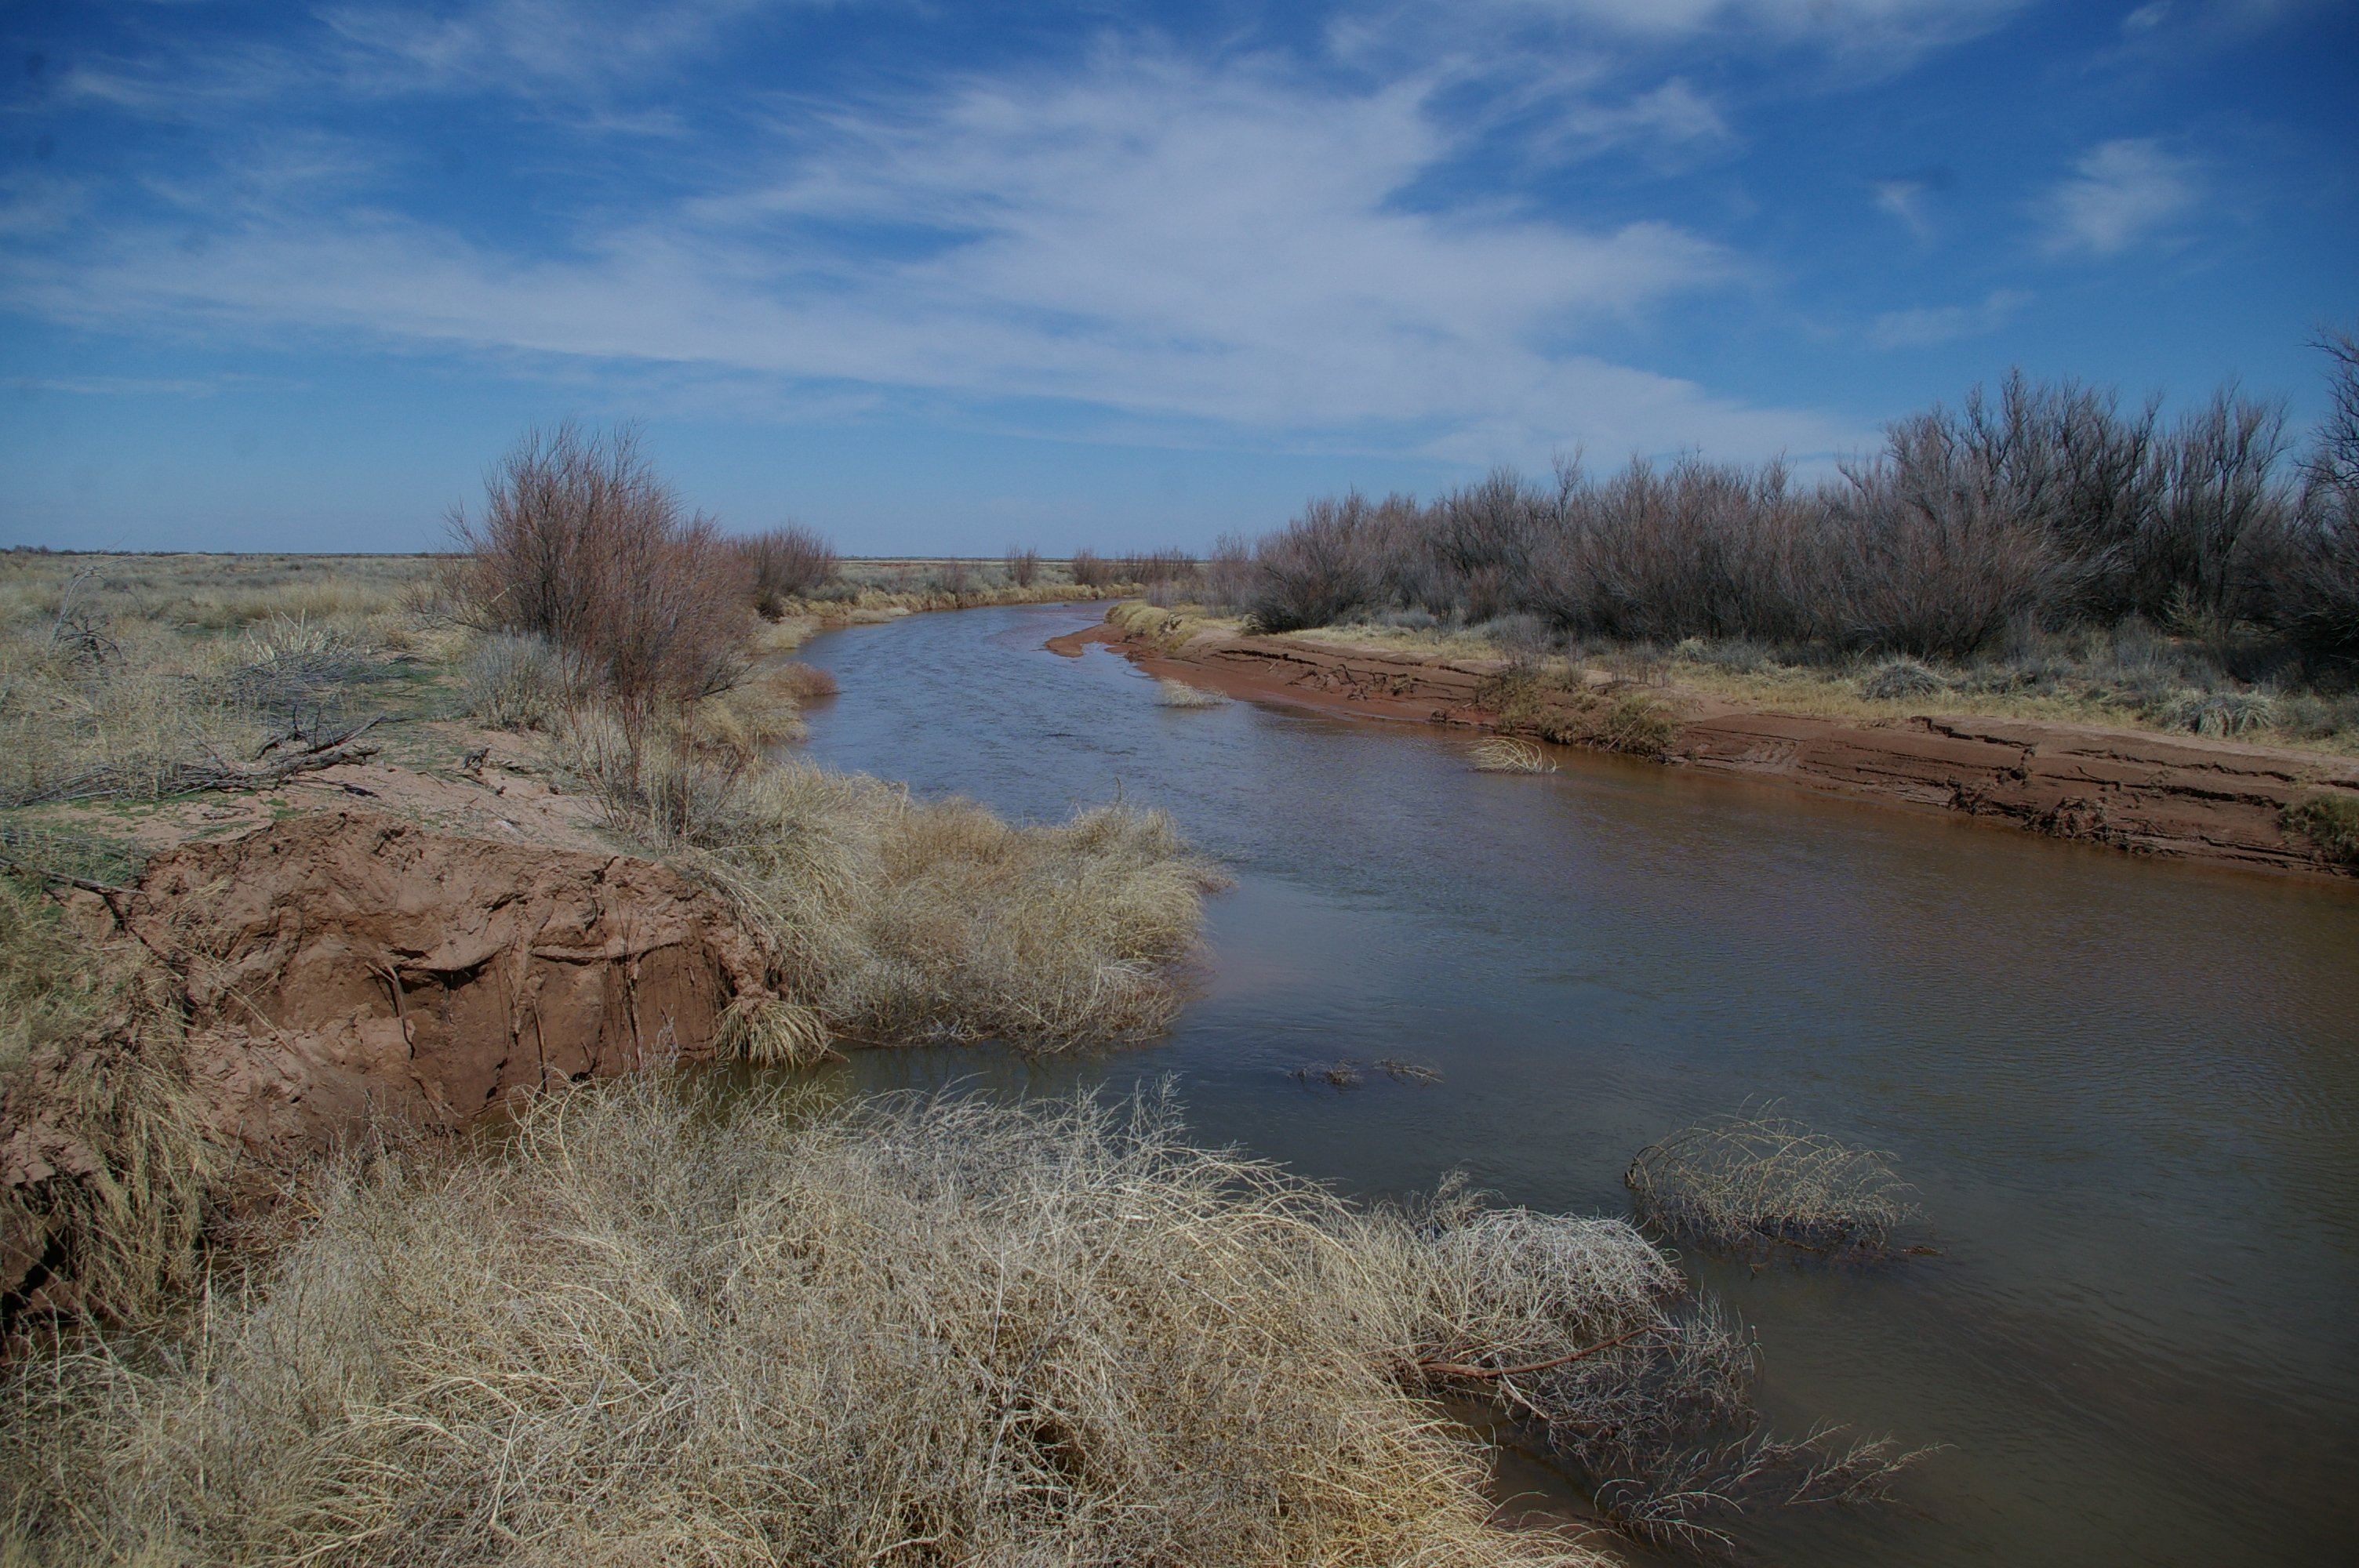 Supreme Court rules for New Mexico in Pecos River water dispute